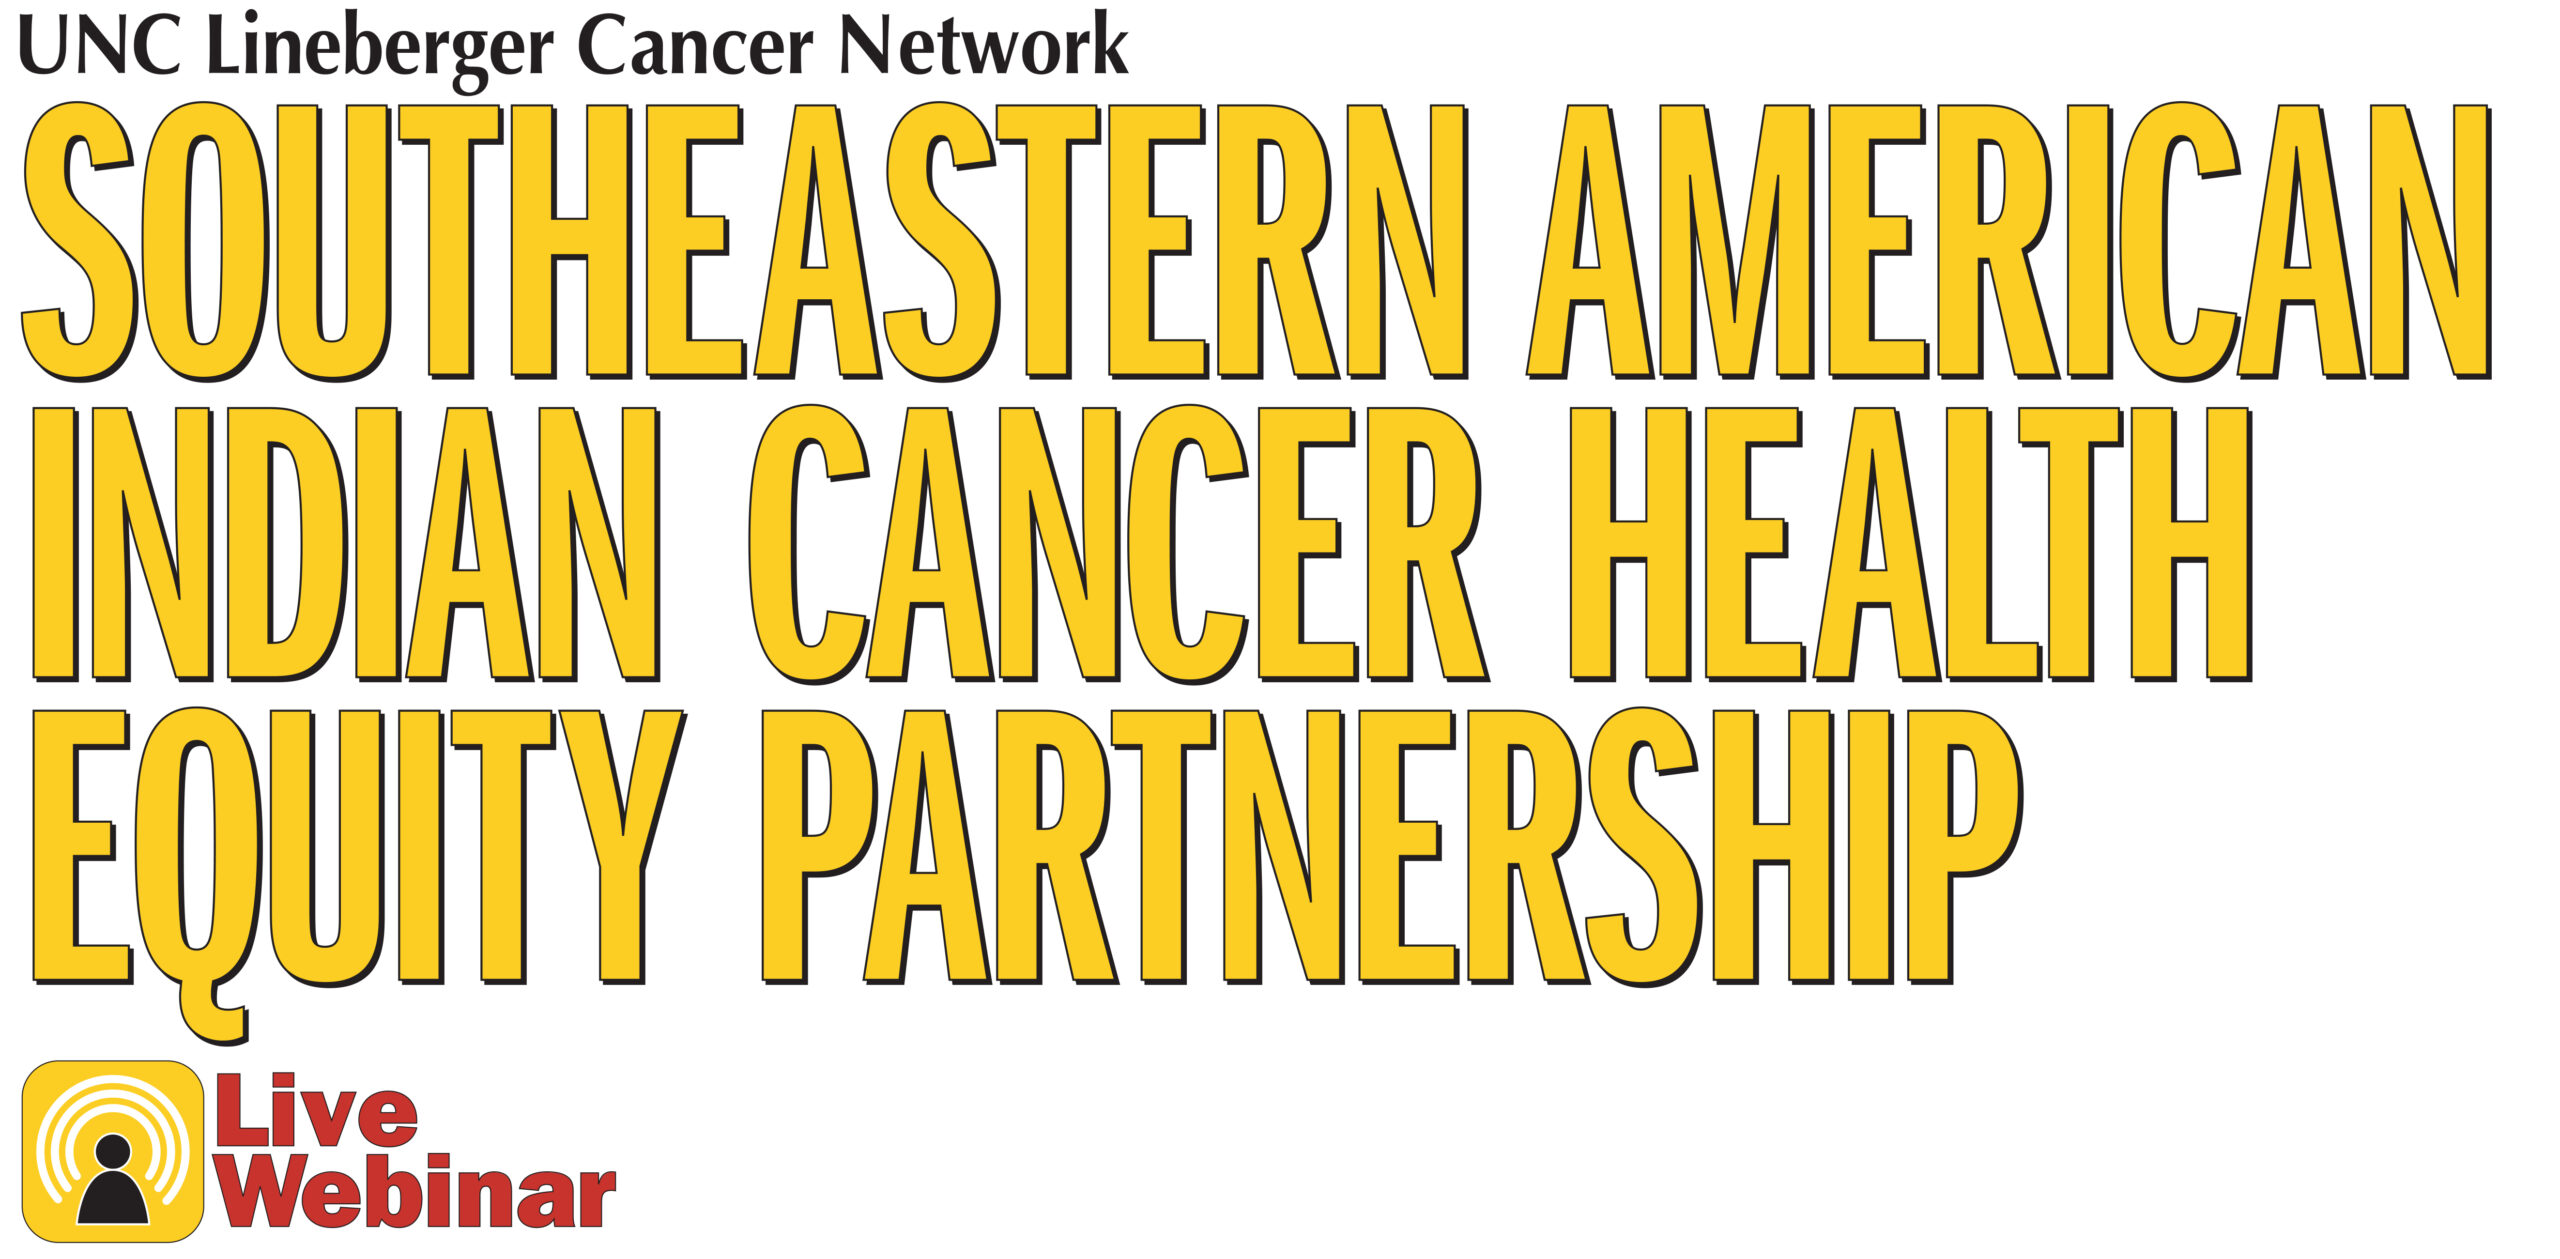 UNC Lineberger Cancer Network Presents a Southeastern American Indian Cancer Health Equity Partnership